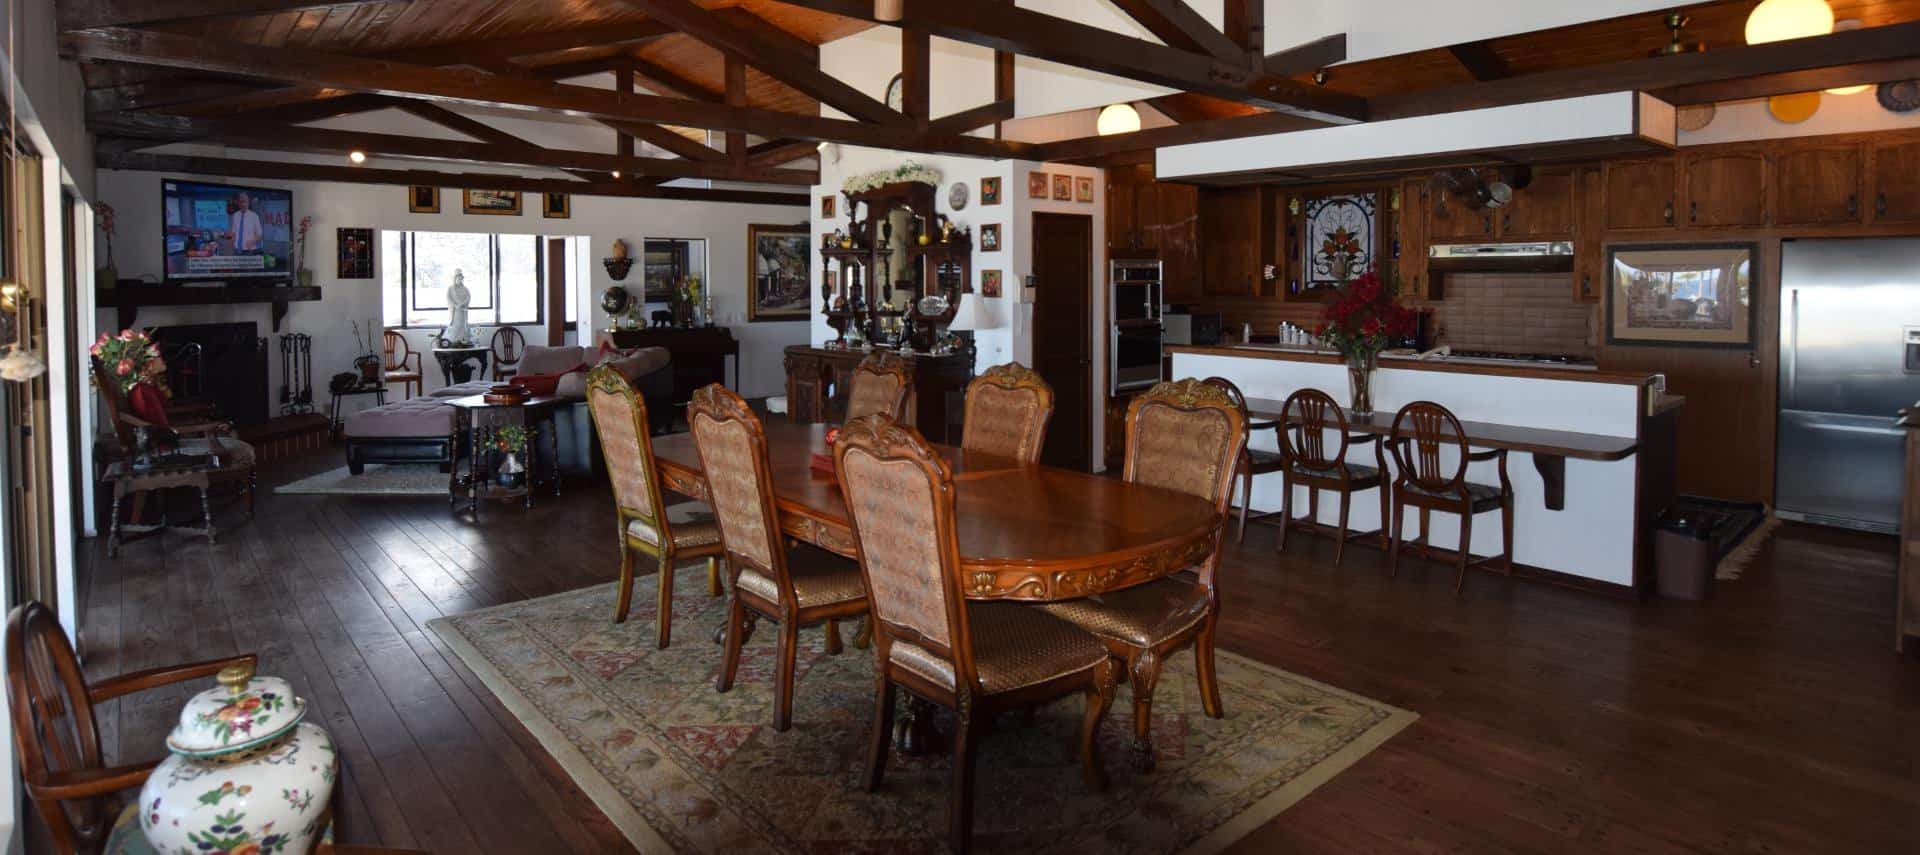 Very large living space with wood floor, ceiling, and beams including large ornate wooden dining table, kitchen area, sitting area, fireplace, and large flat-screen TV